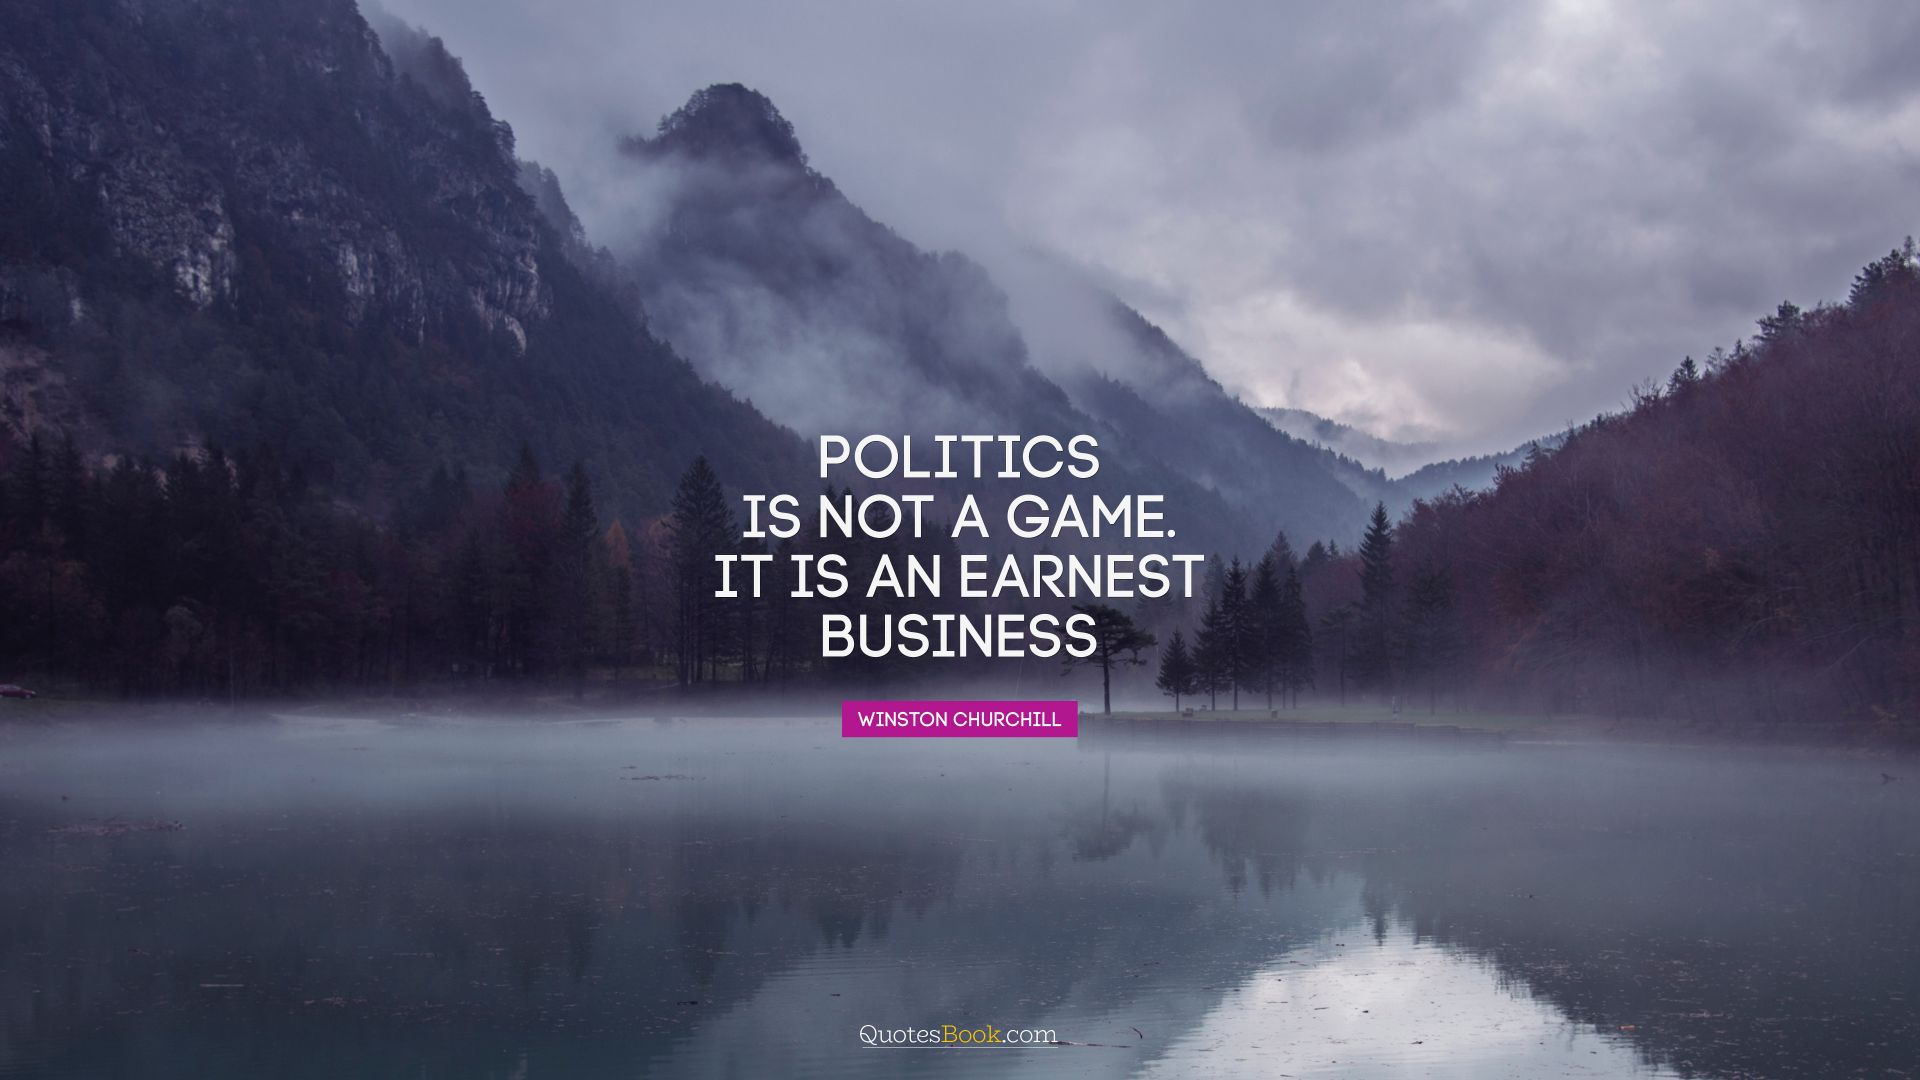 Politics is not a game. It is an earnest business. - Quote by Winston Churchill